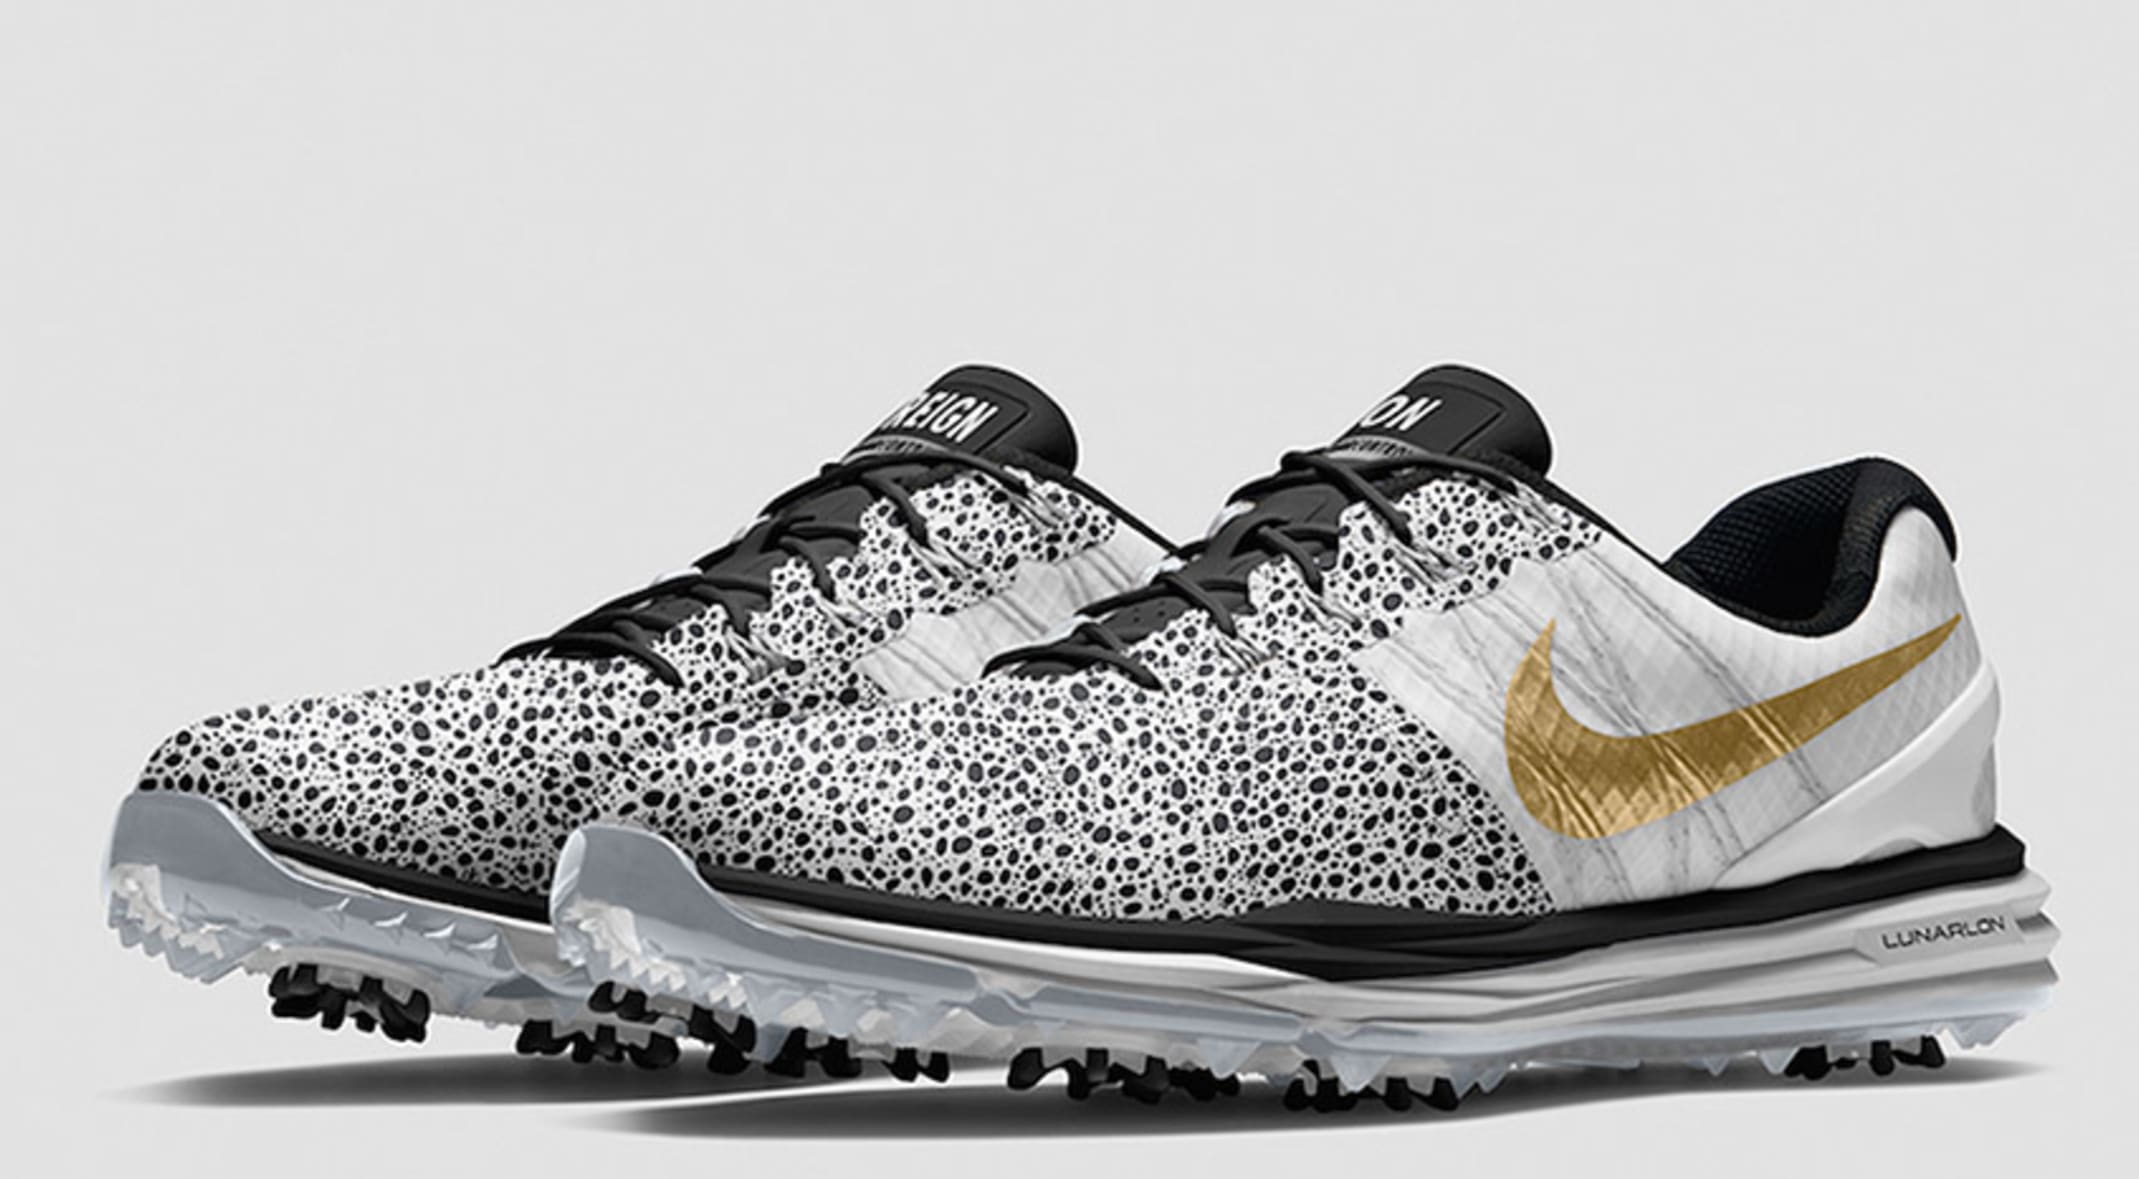 nike golf shoes open championship